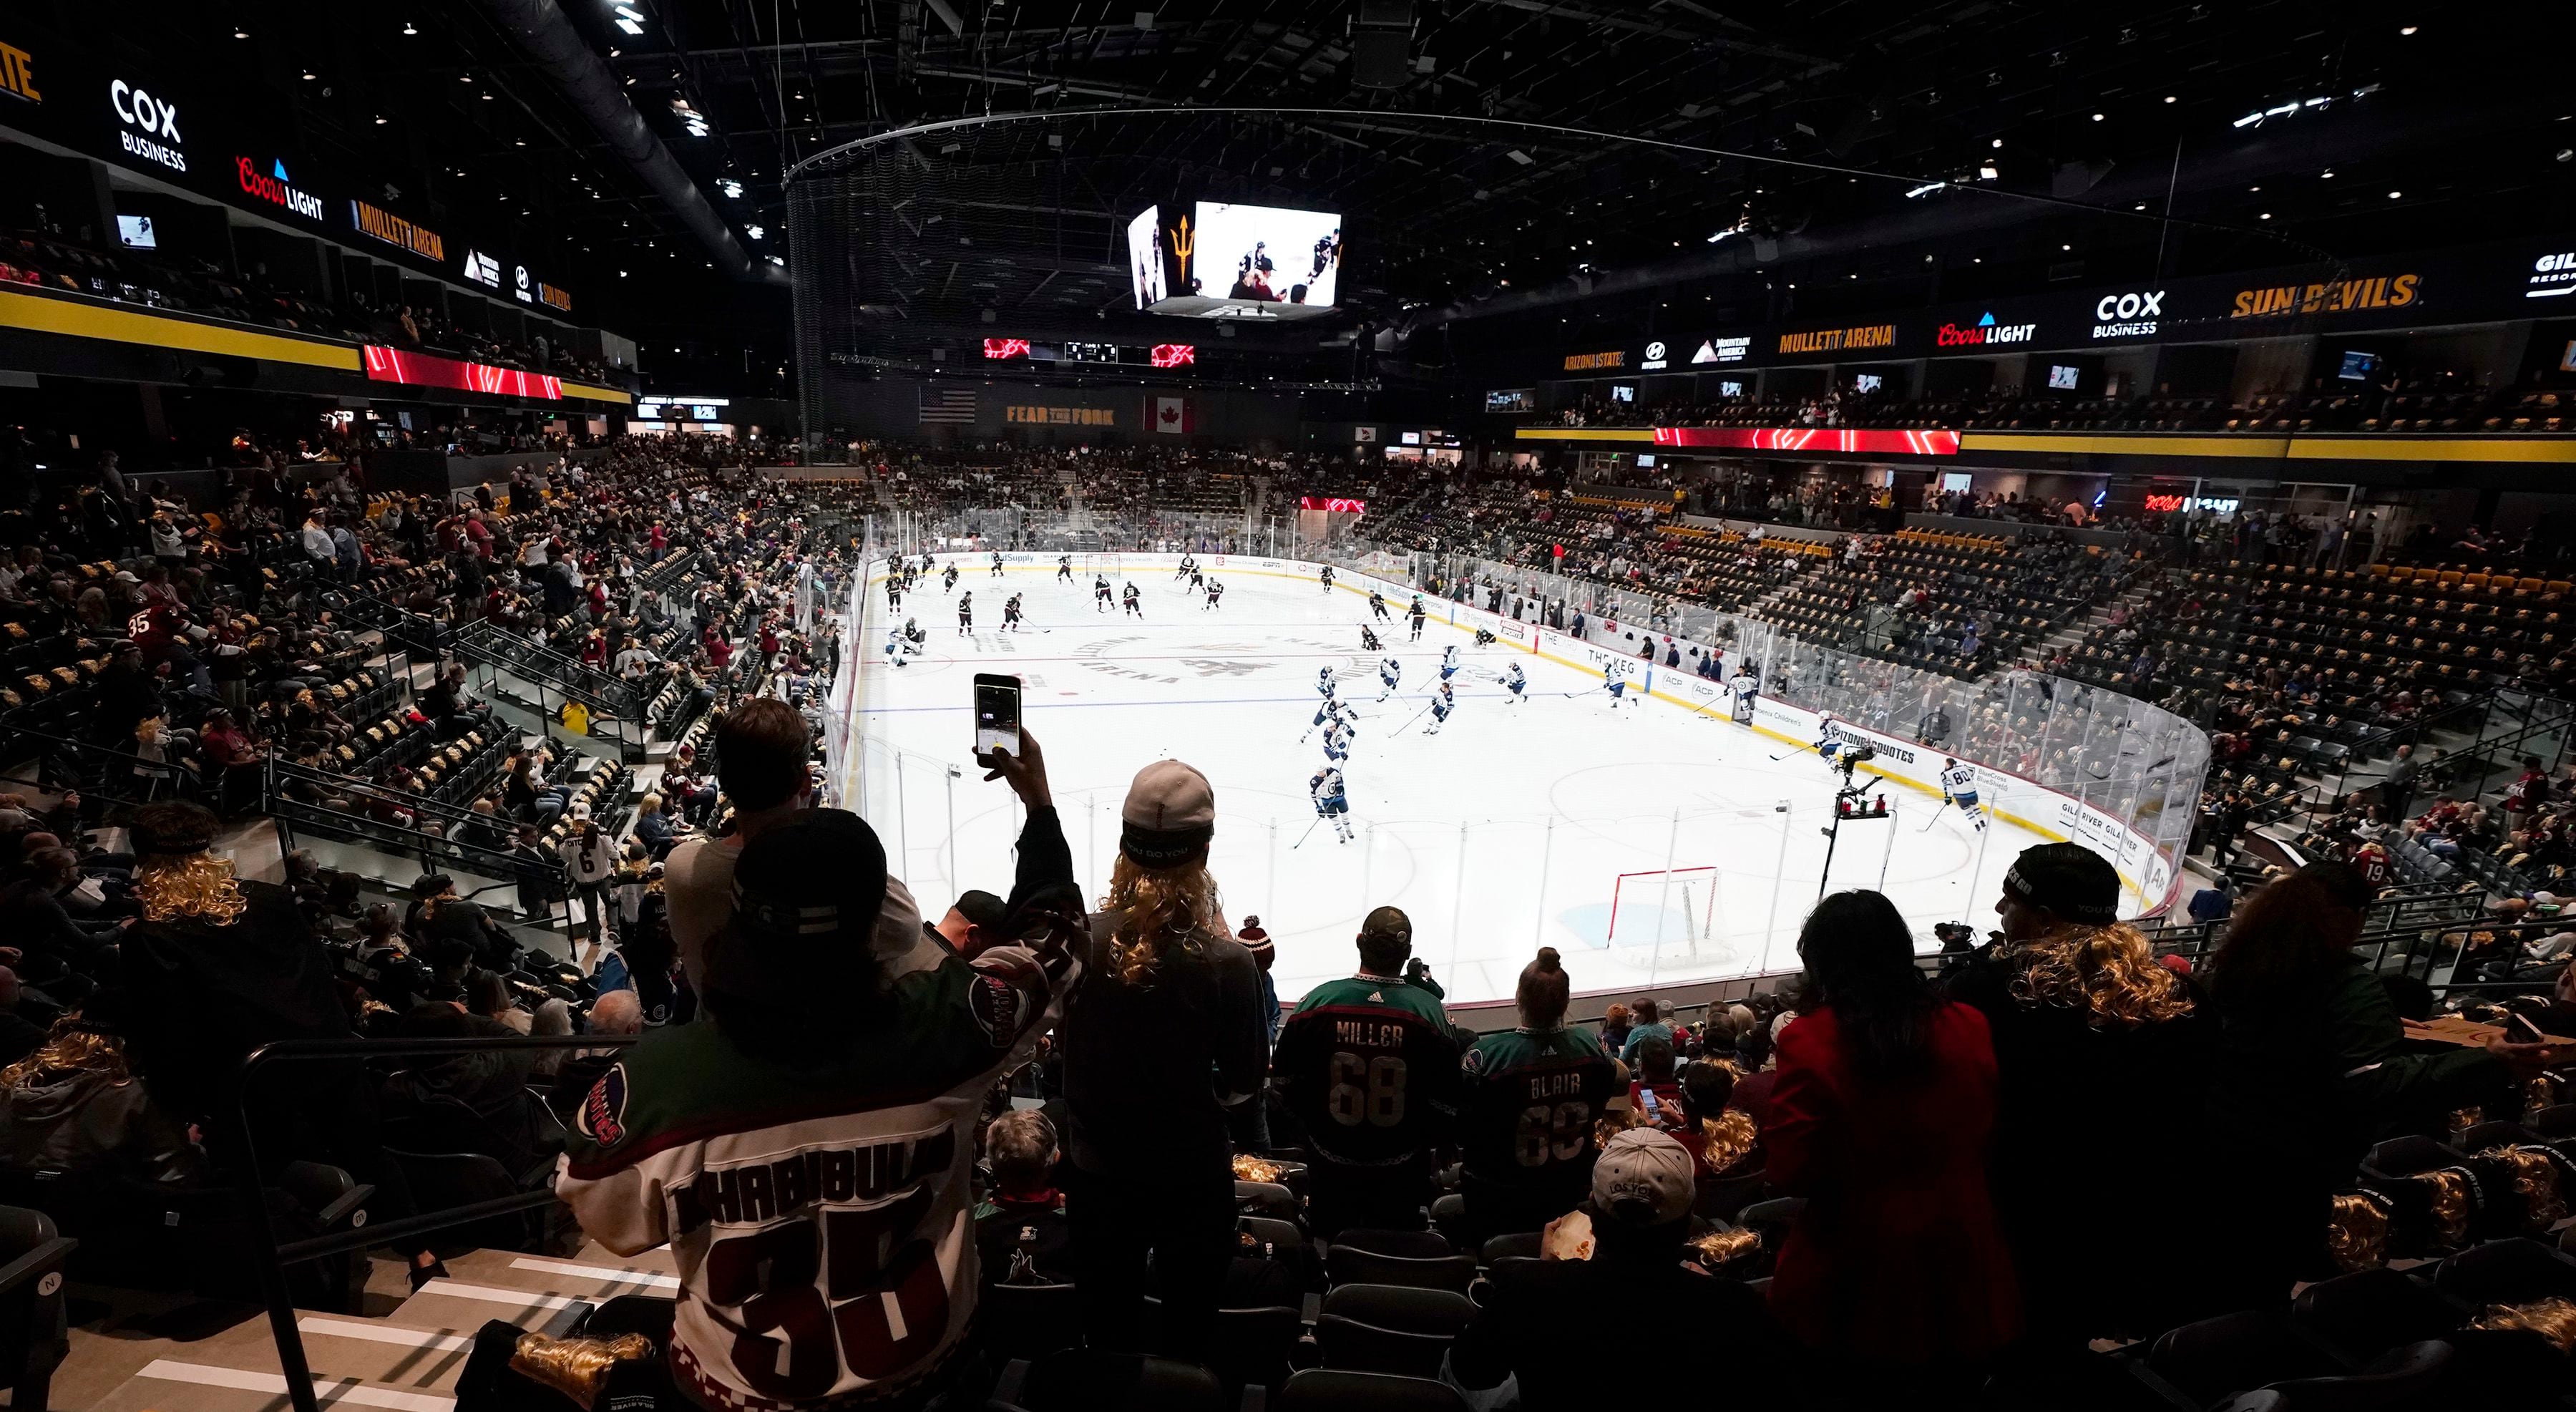 Salt Lake City arena is ready to receive the Coyotes : r/nhl